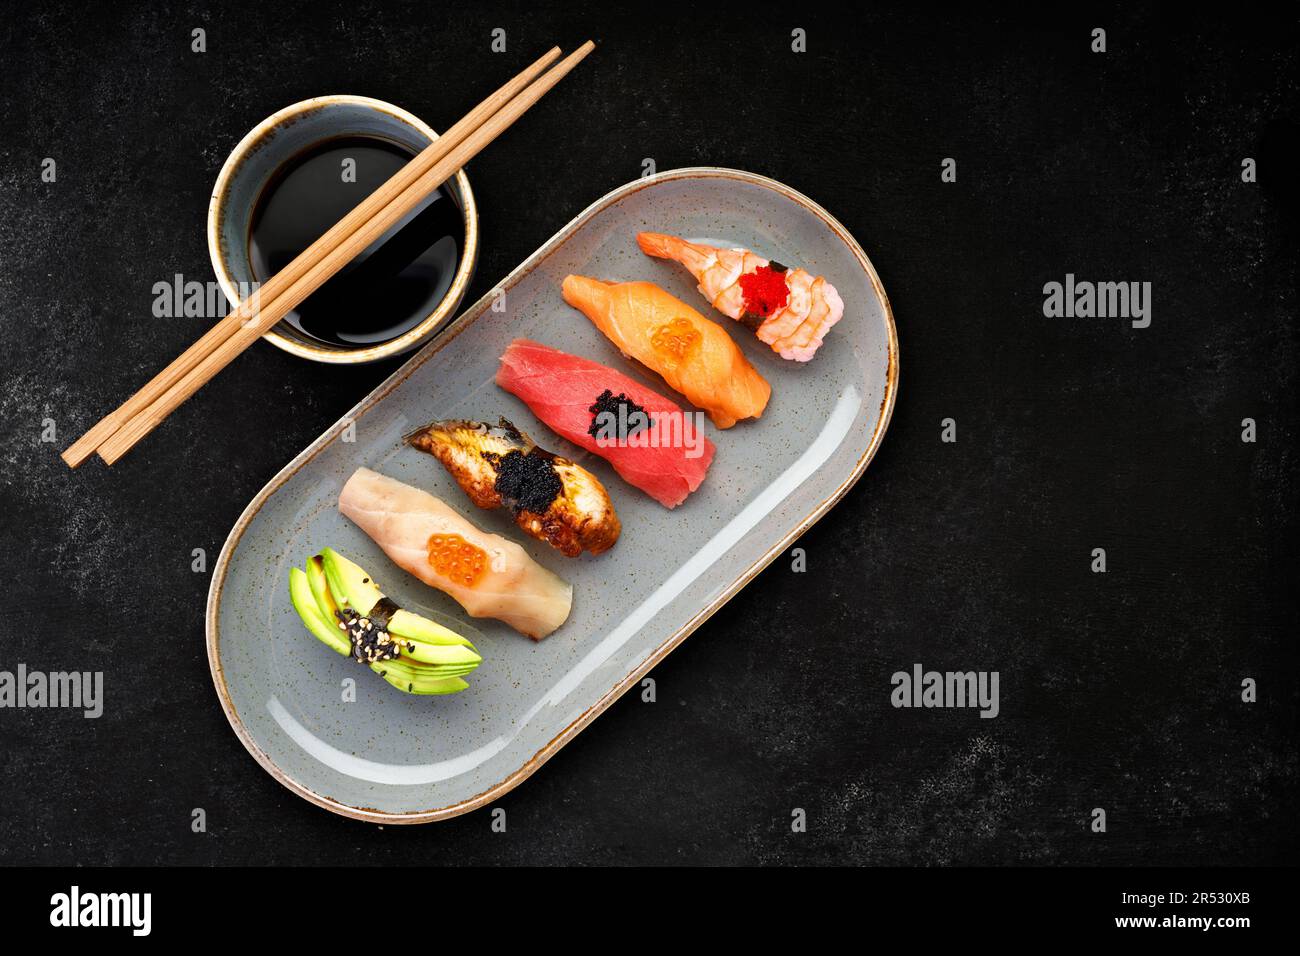 exquisite nigiri sushi featuring a variety of flavors including shrimp, eel, avocado, salmon, and tuna Stock Photo